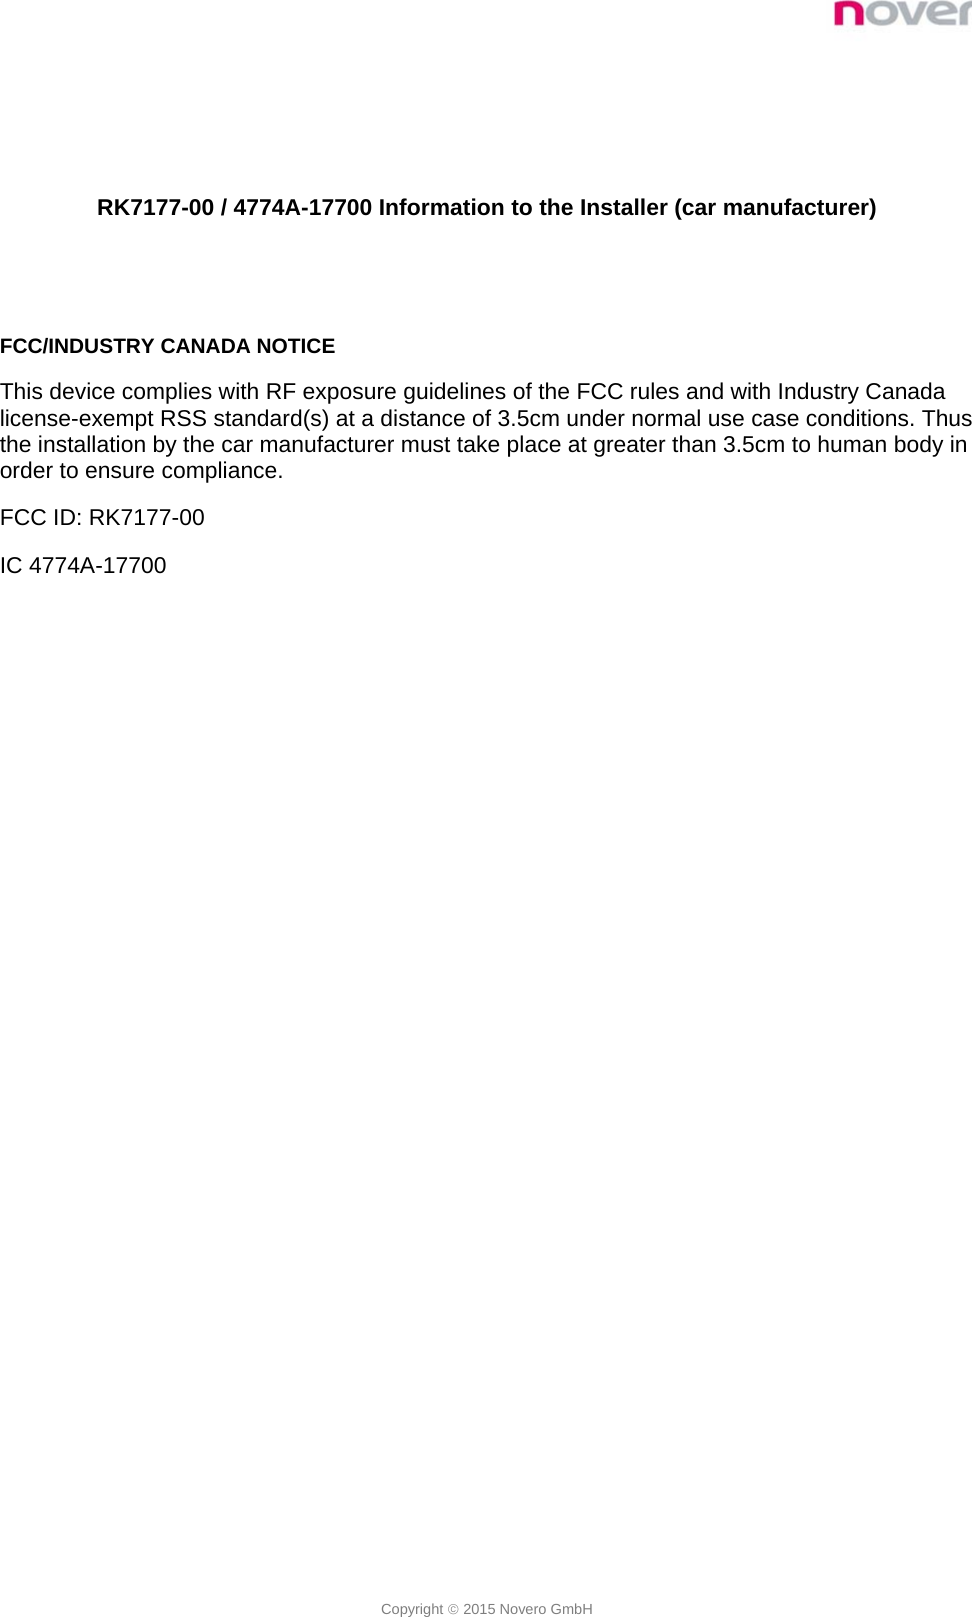  Copyright  2015 Novero GmbH   RK7177-00 / 4774A-17700 Information to the Installer (car manufacturer)   FCC/INDUSTRY CANADA NOTICE This device complies with RF exposure guidelines of the FCC rules and with Industry Canada license-exempt RSS standard(s) at a distance of 3.5cm under normal use case conditions. Thus the installation by the car manufacturer must take place at greater than 3.5cm to human body in order to ensure compliance. FCC ID: RK7177-00 IC 4774A-17700 